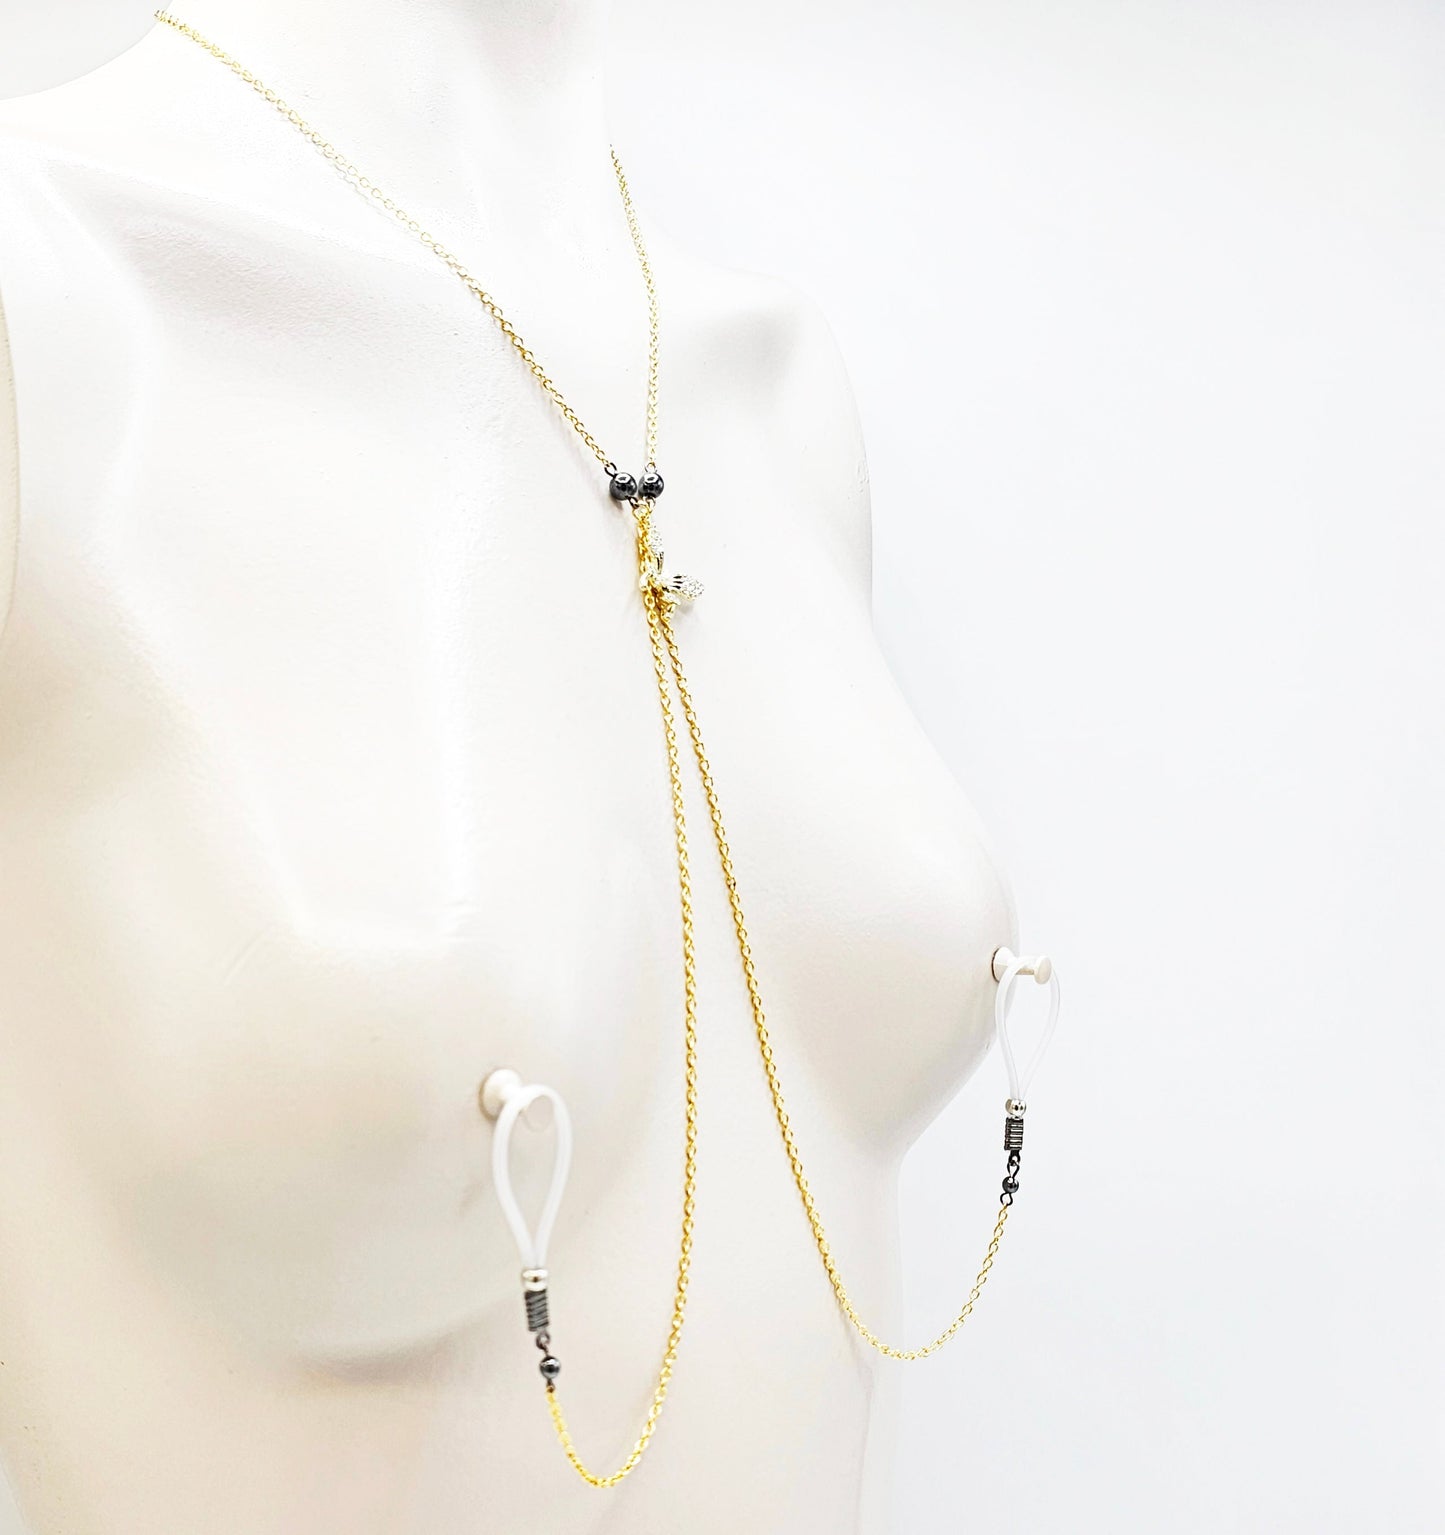 Gold Necklace to Nipple, Non-Piercing, with Beautiful Butterfly. Choose Nipple Nooses or Nipple Clamps. MATURE Body Jewelry